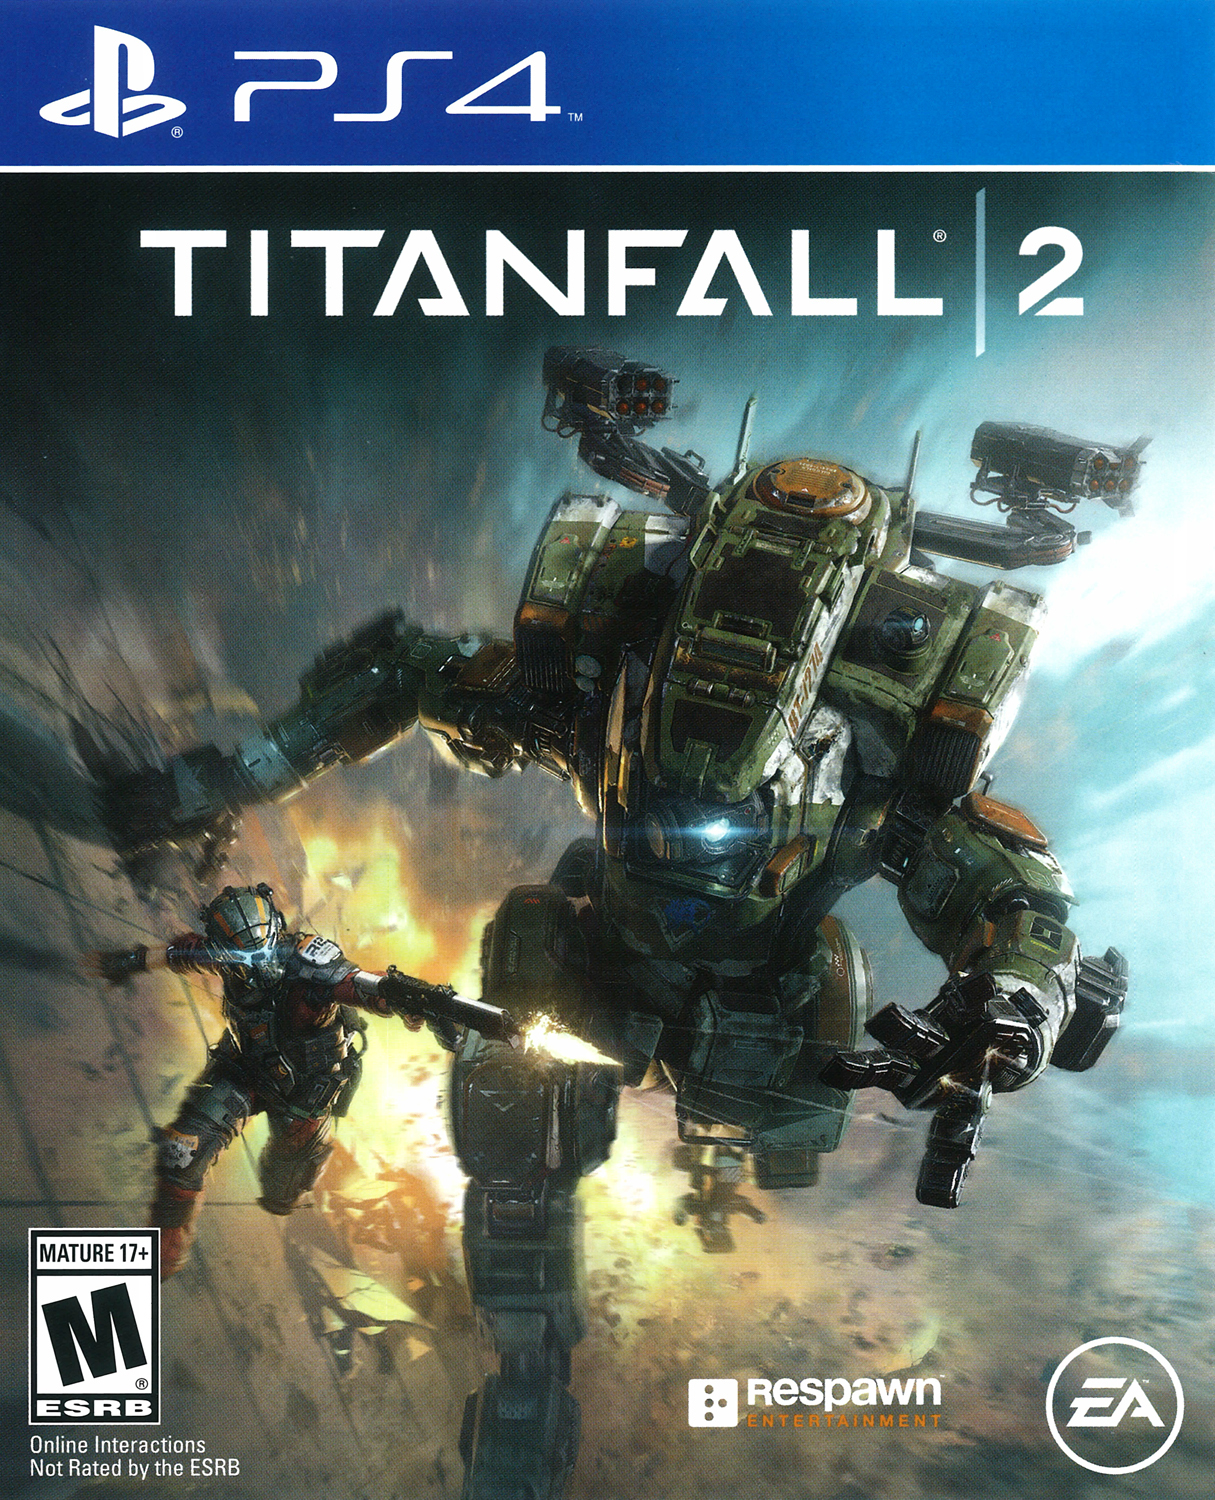 Titanfall 2, Electronic Arts, PlayStation 4, [Physical], 014633368741 - image 1 of 9